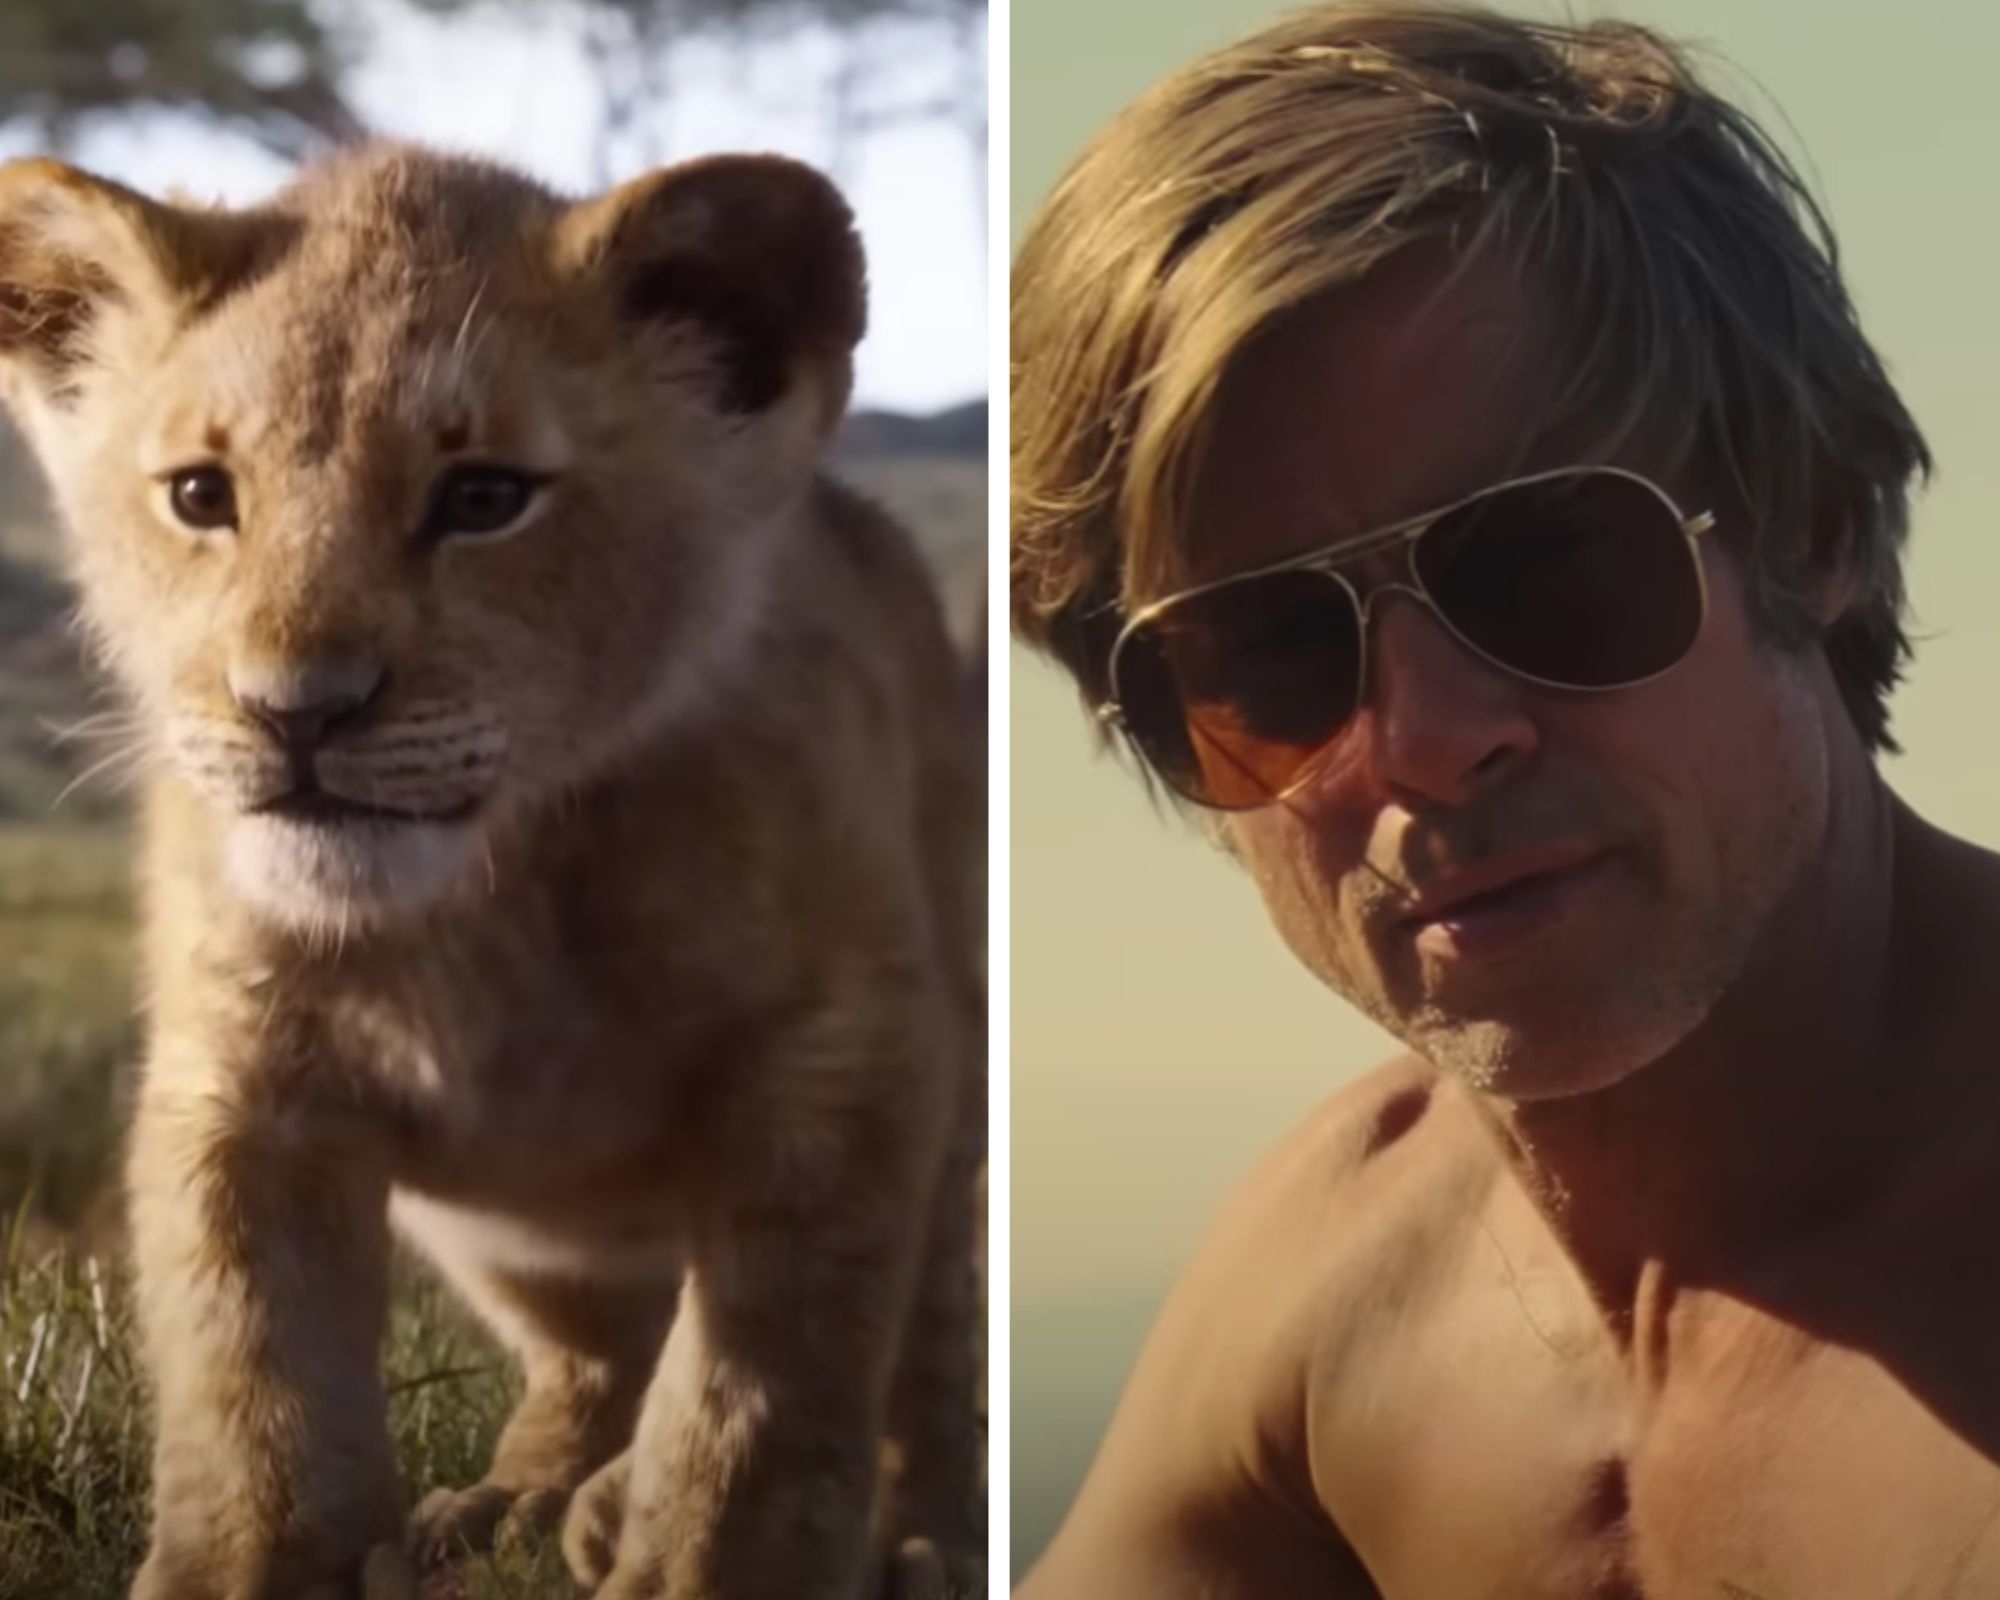 The Lion King&#x27;s Simba and Brad Pitt in Once Upon a Time in Hollywood